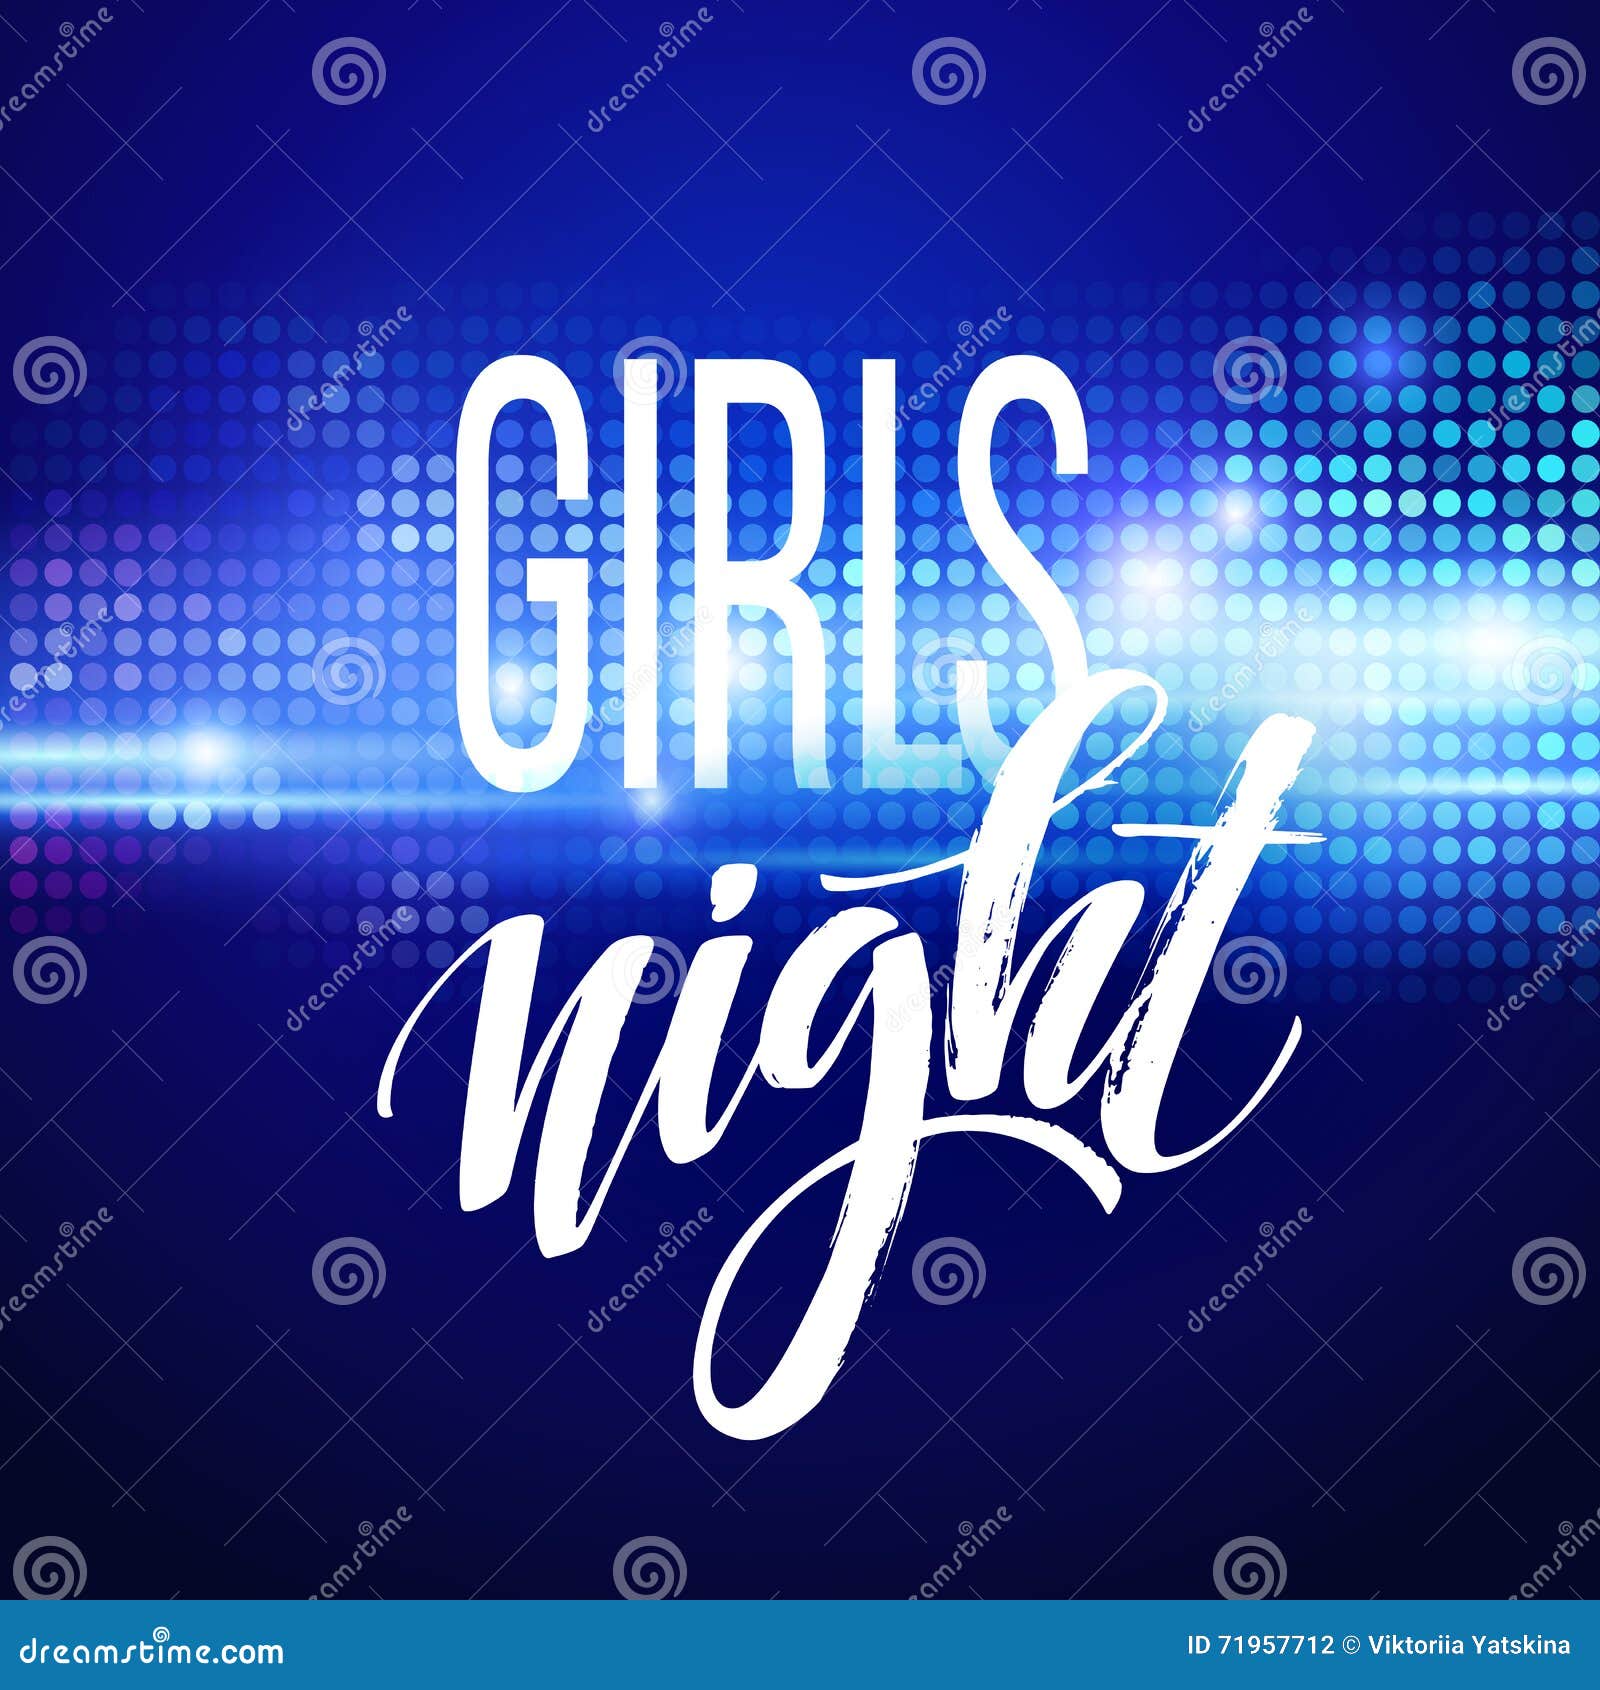 Night Party Typography Design. Vector Illustration Stock Vector ...